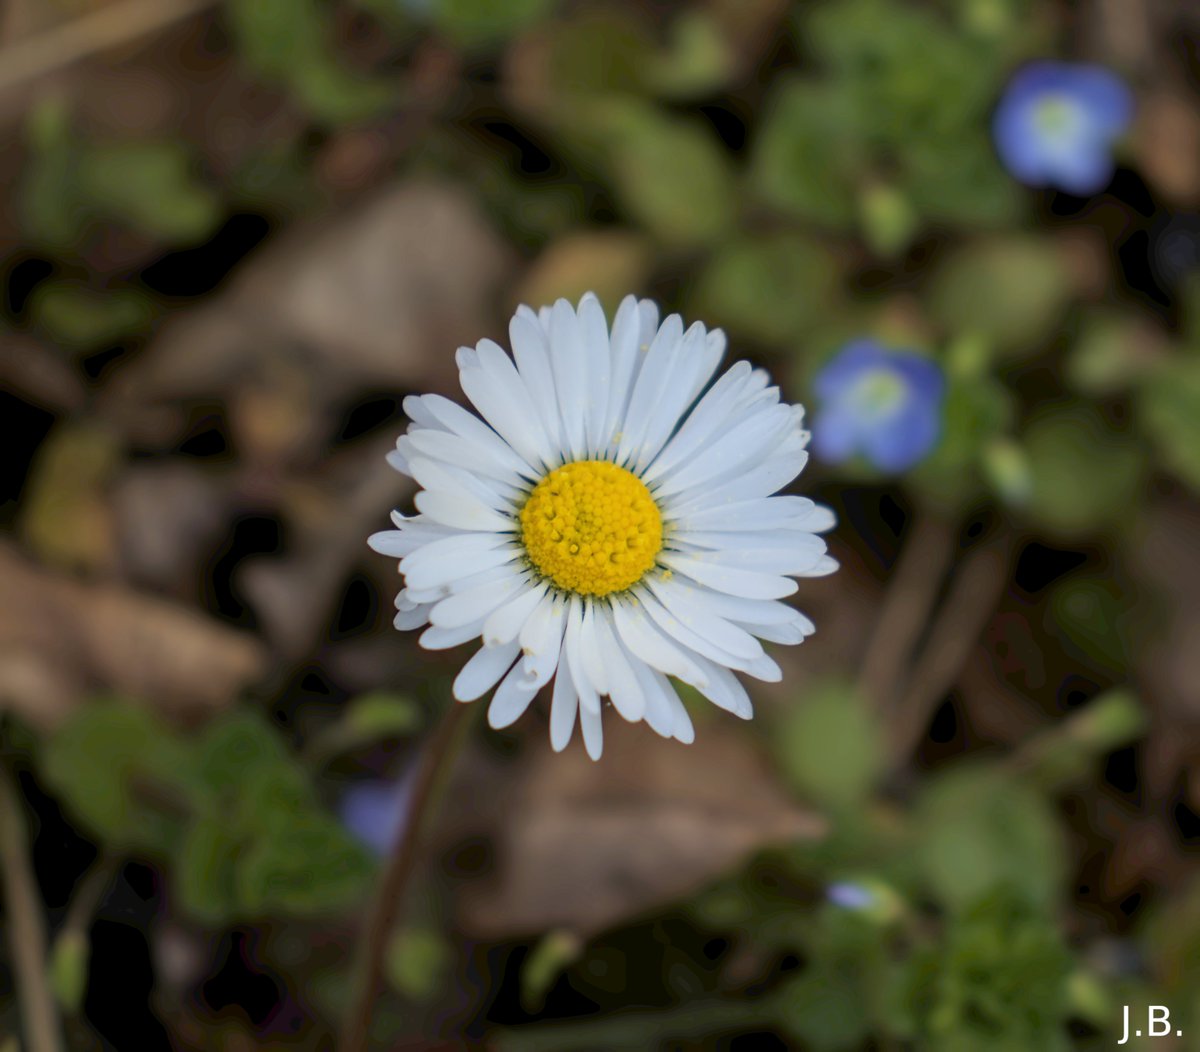 Daisy at her best blossom #picoftheday #photography #pics #daisy #blossom #spring #macro #fiverr #fivergig